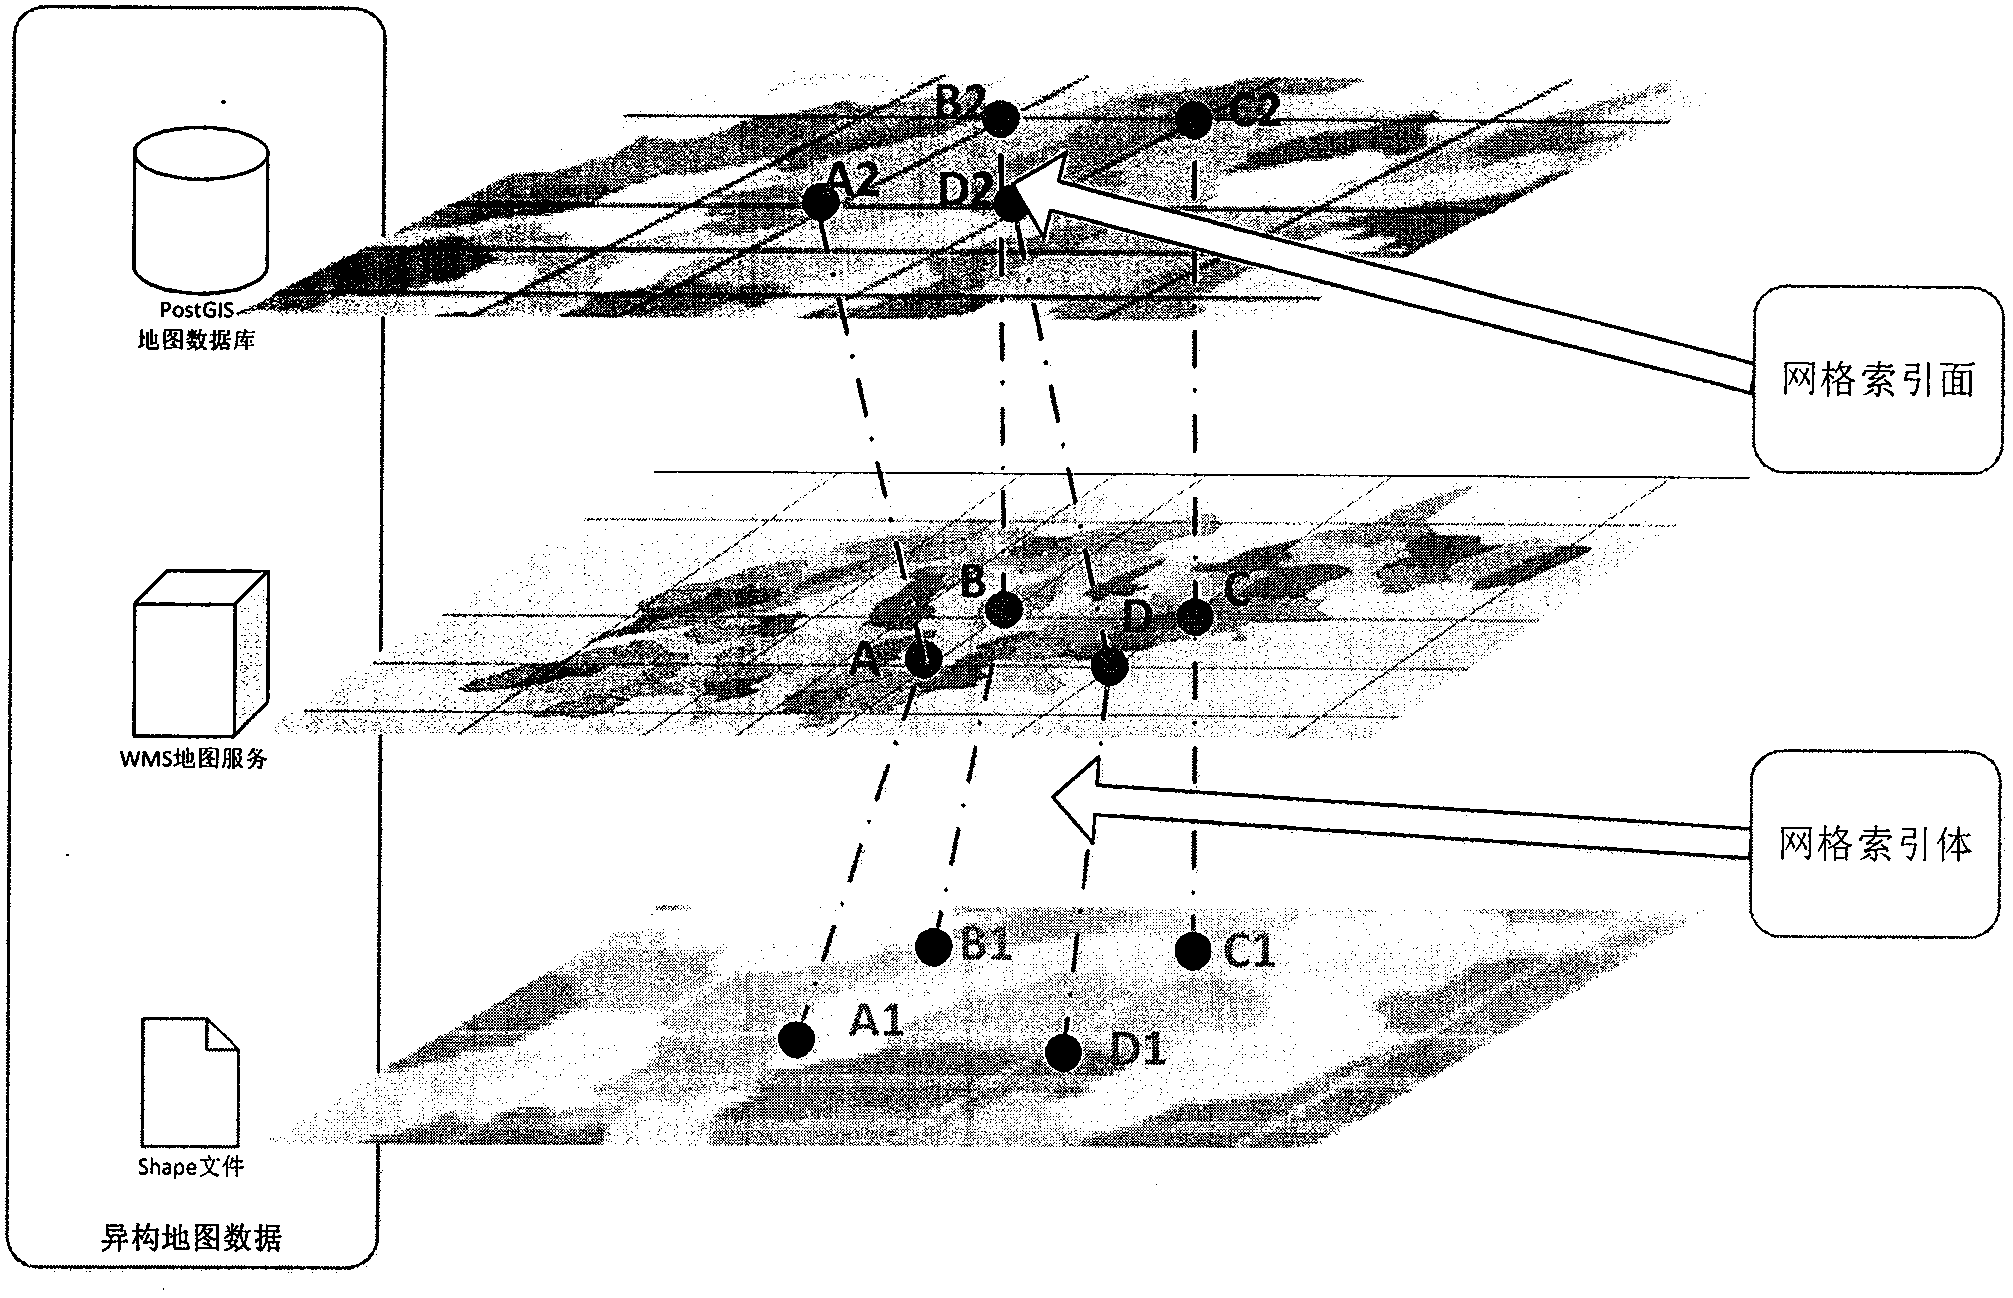 Heterogeneous geospatial data management technique based on spatial object generalized model and grid body indexing